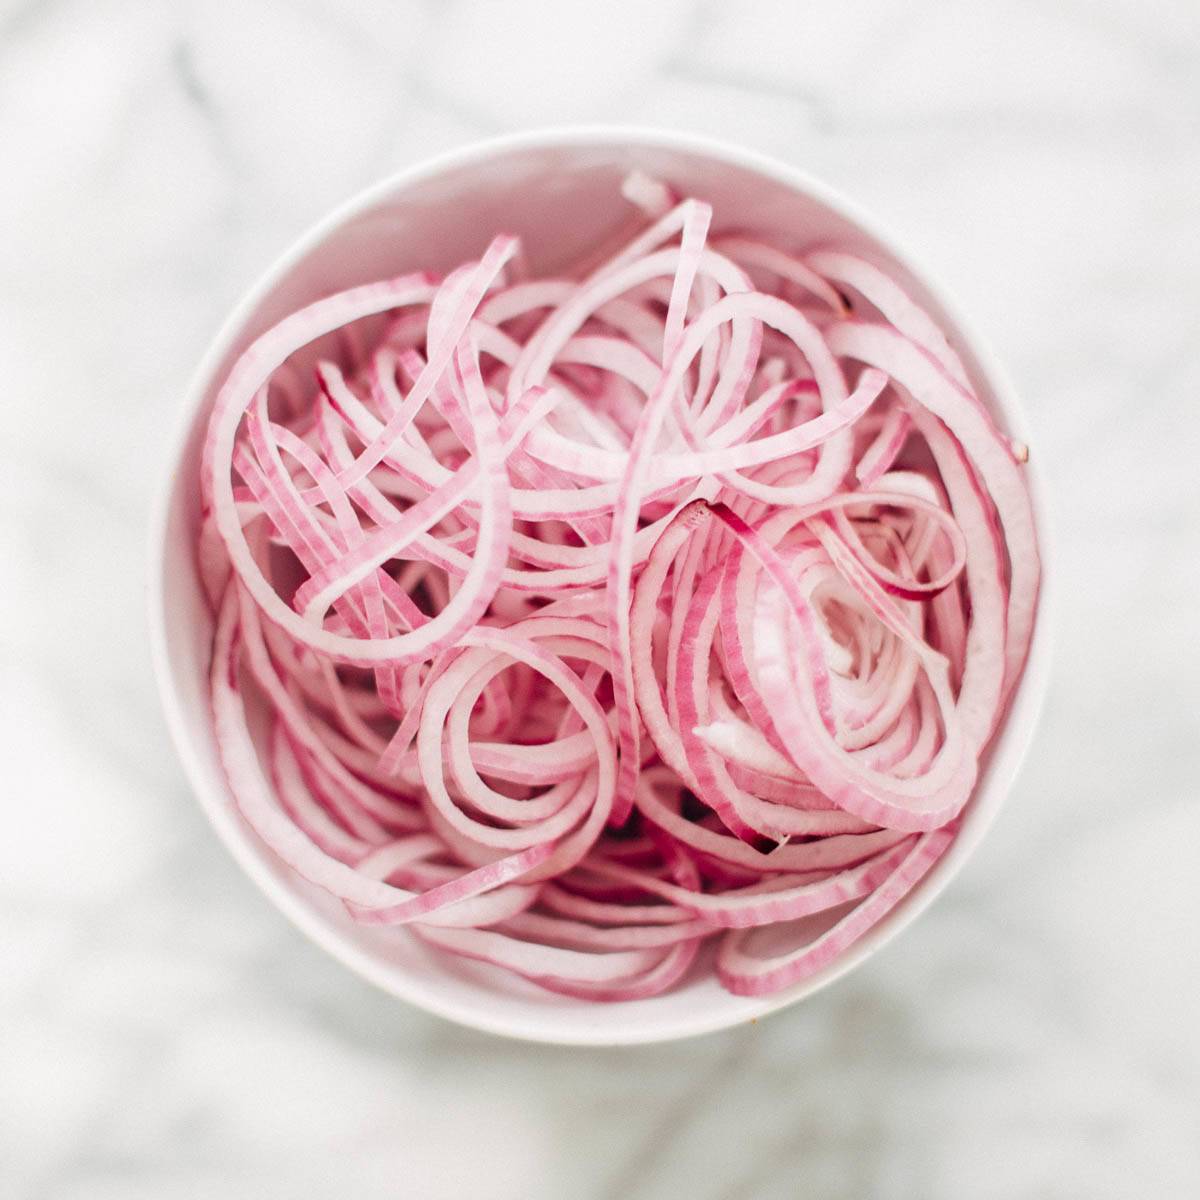 8 Life-Changing Ways to Use a Spiralizer - Pinch of Yum